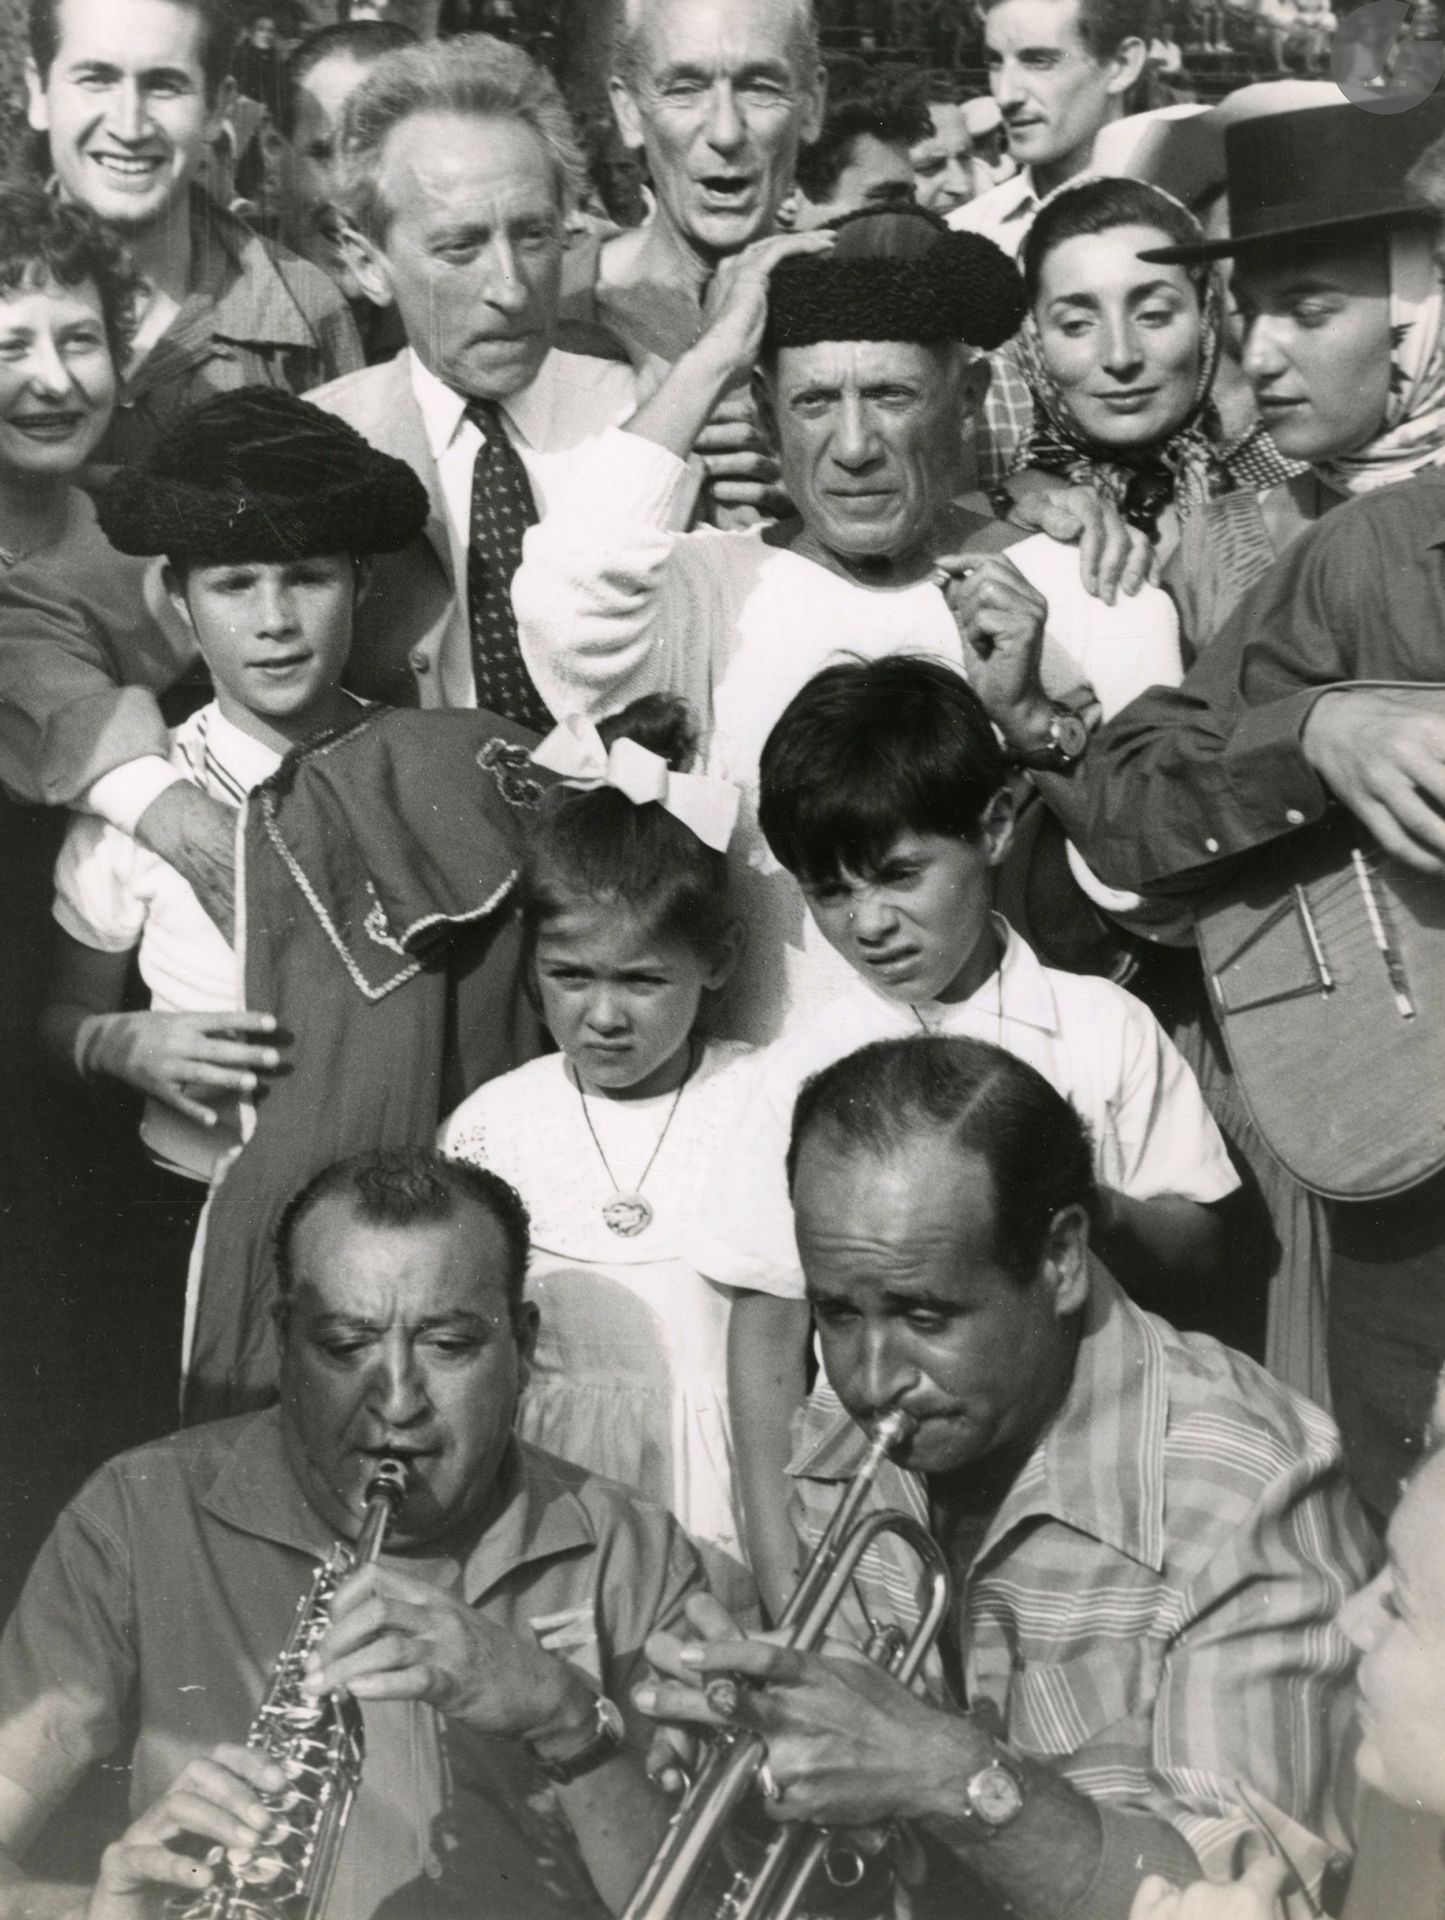 Pablo Picasso, Paloma, Jacqueline, Claude, Jacques-Henri Lartigue and Jean Cocteau at the Vallauris bullfight. The painter in his studio by Edward Quinn, c. 1955